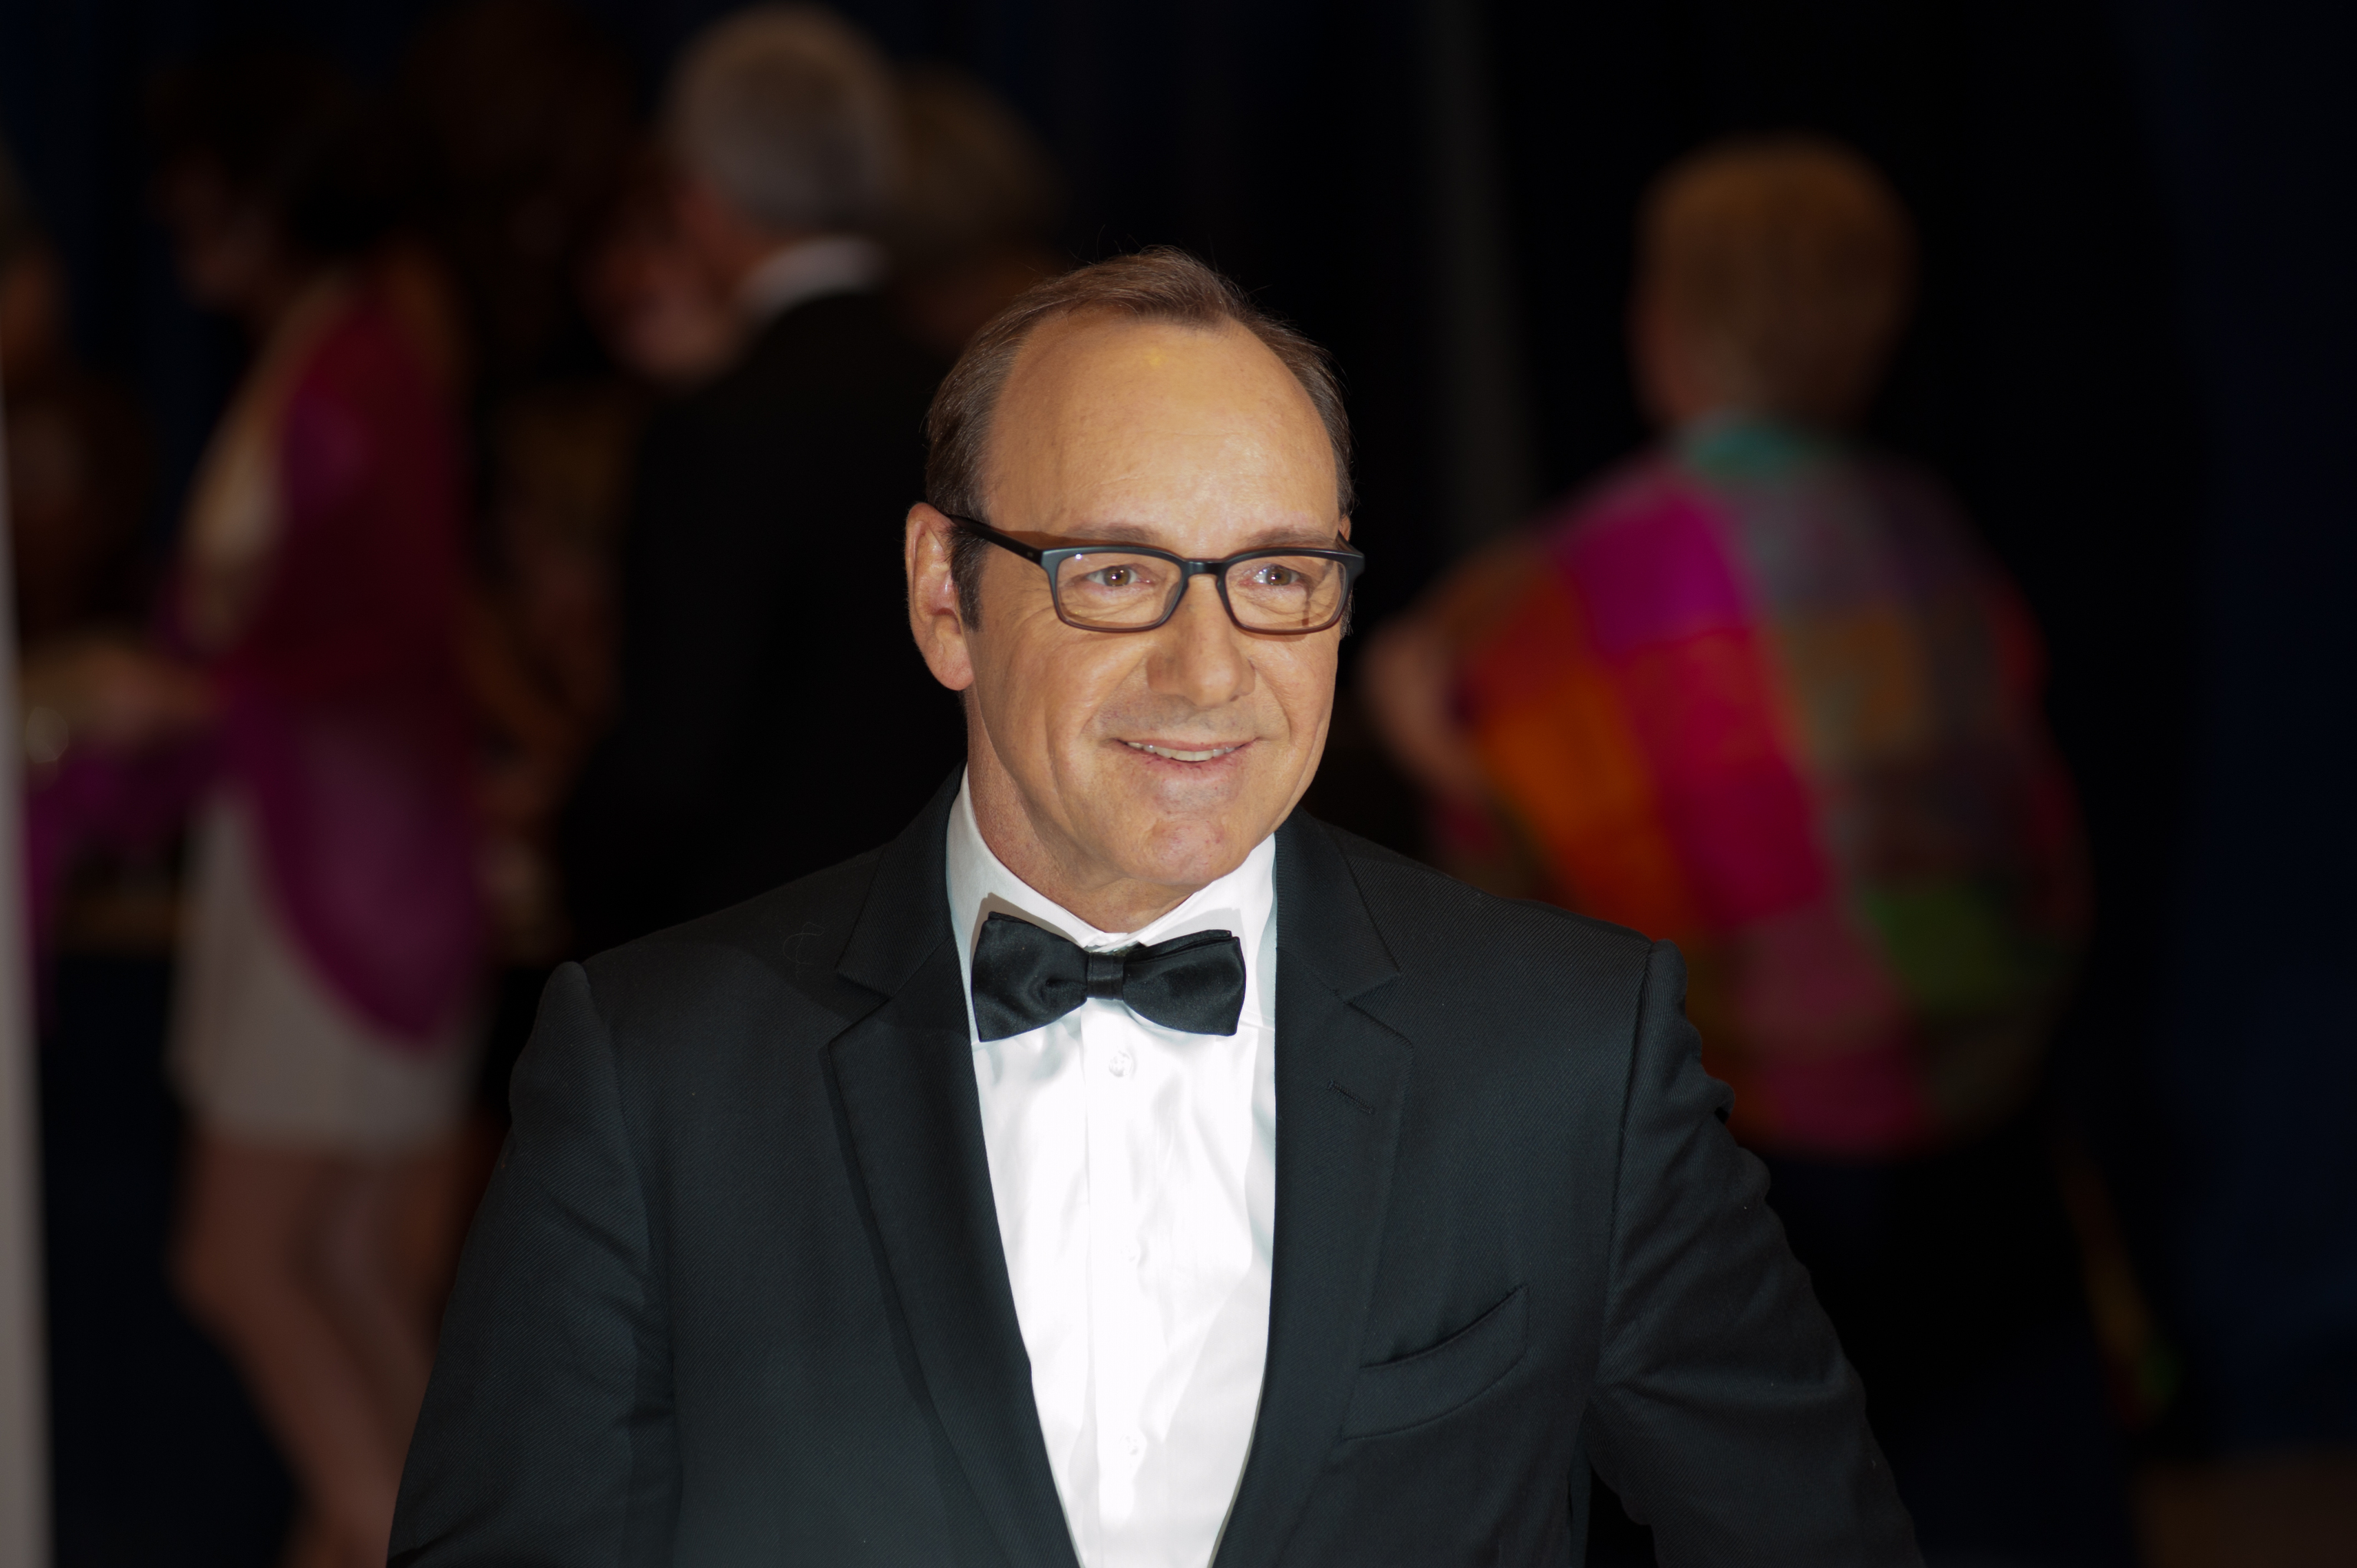 Kevin Spacey at the White House Correspondents Dinner in April 2012.